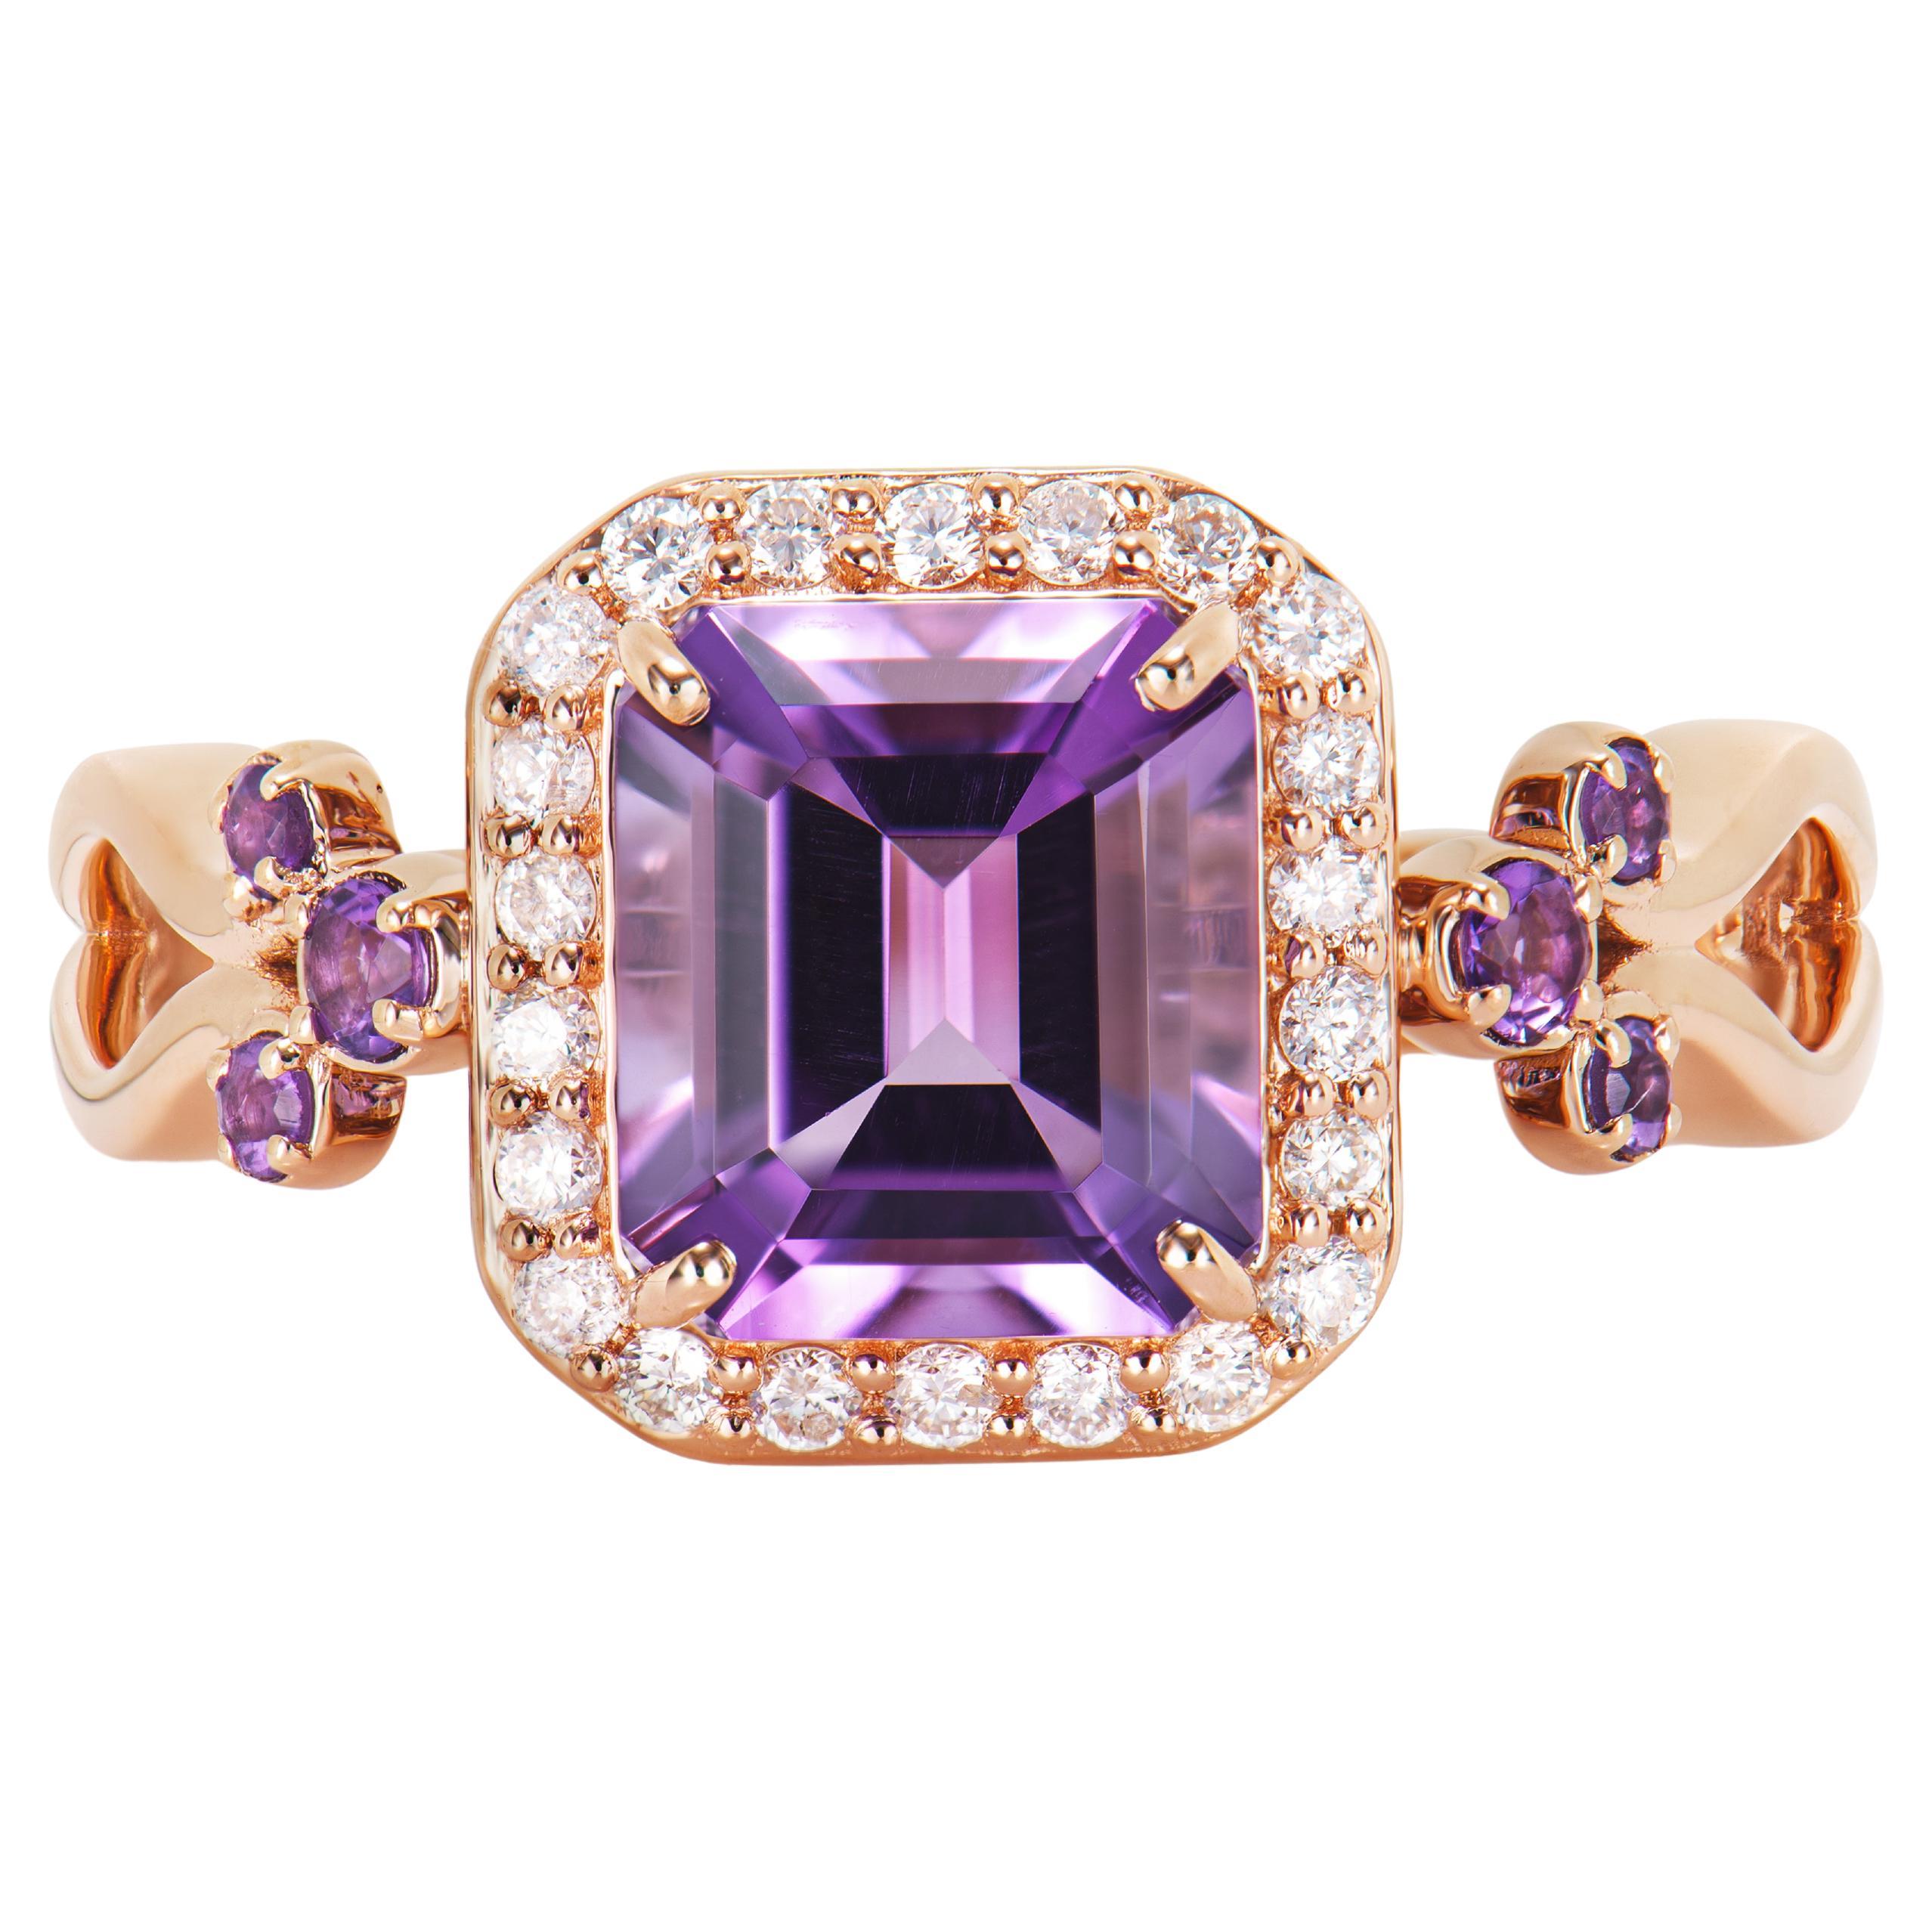 1.78 Carat Amethyst Fancy Ring in 14Karat Rose Gold with White Diamond.   For Sale